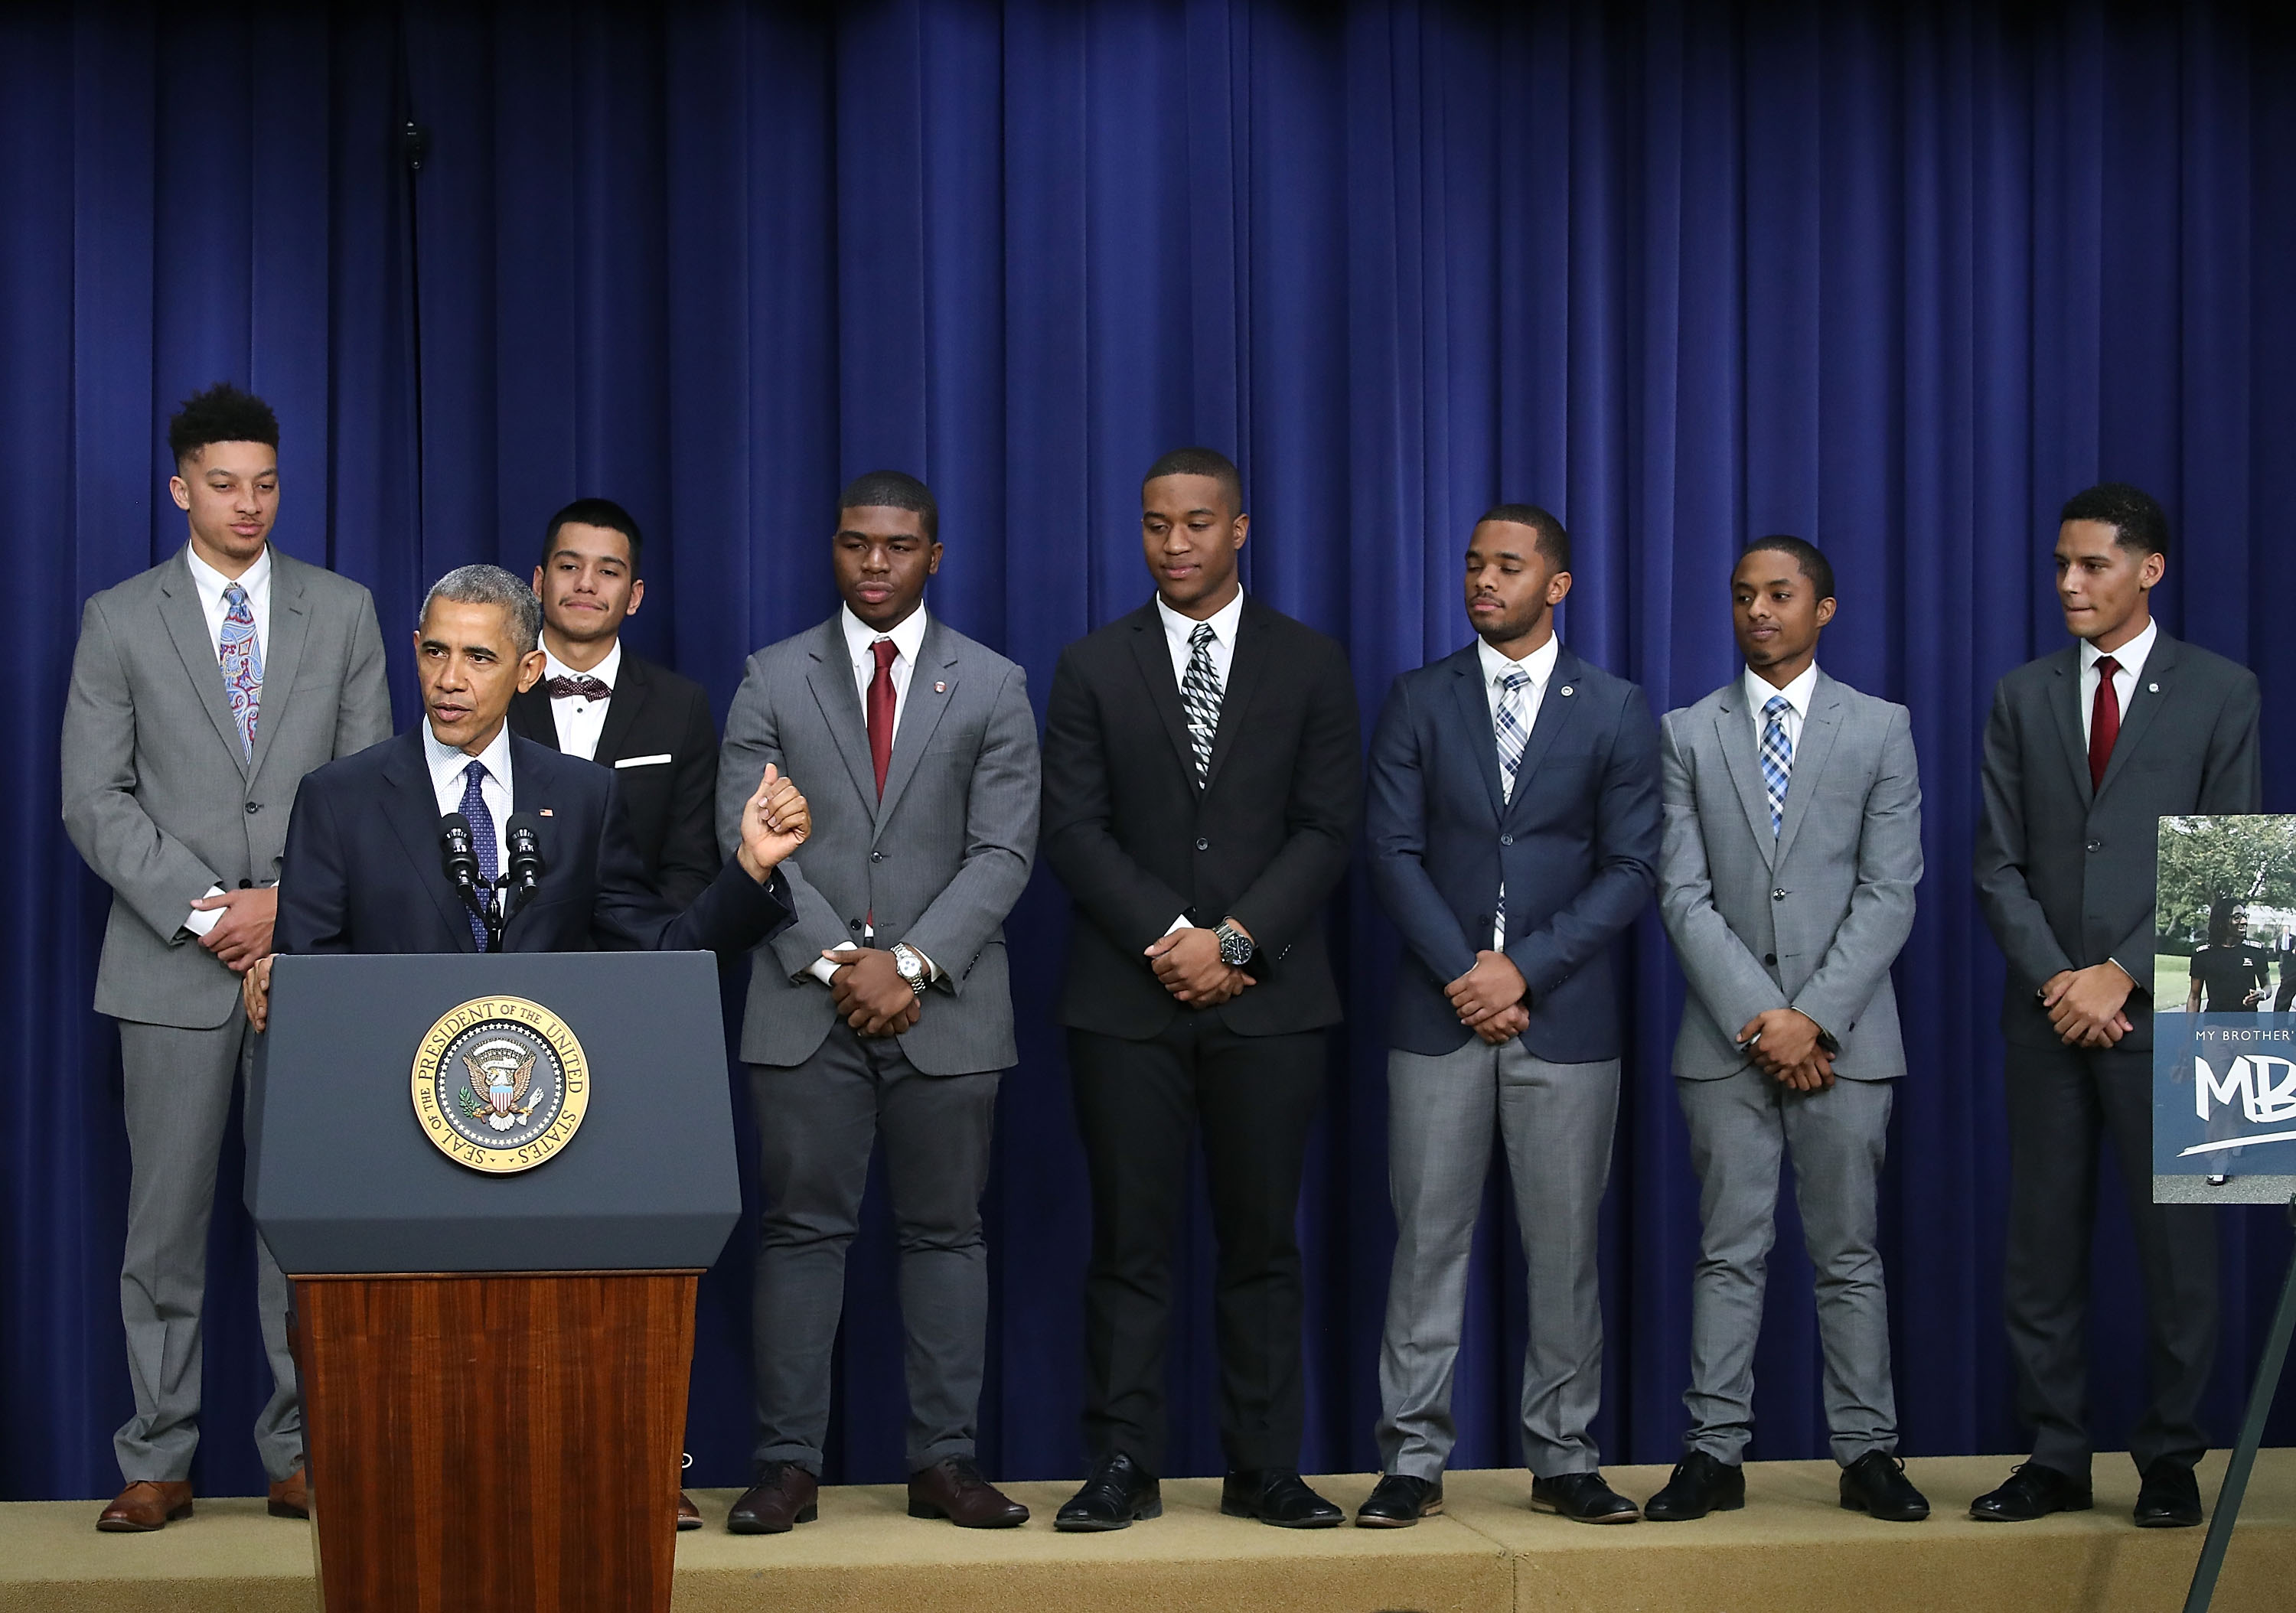 President Barack Obama speaks during the annual My Brother's Keeper event at the White House, Dec. 14, 2016 in Washington, DC. (Mark Wilson—Getty Images)